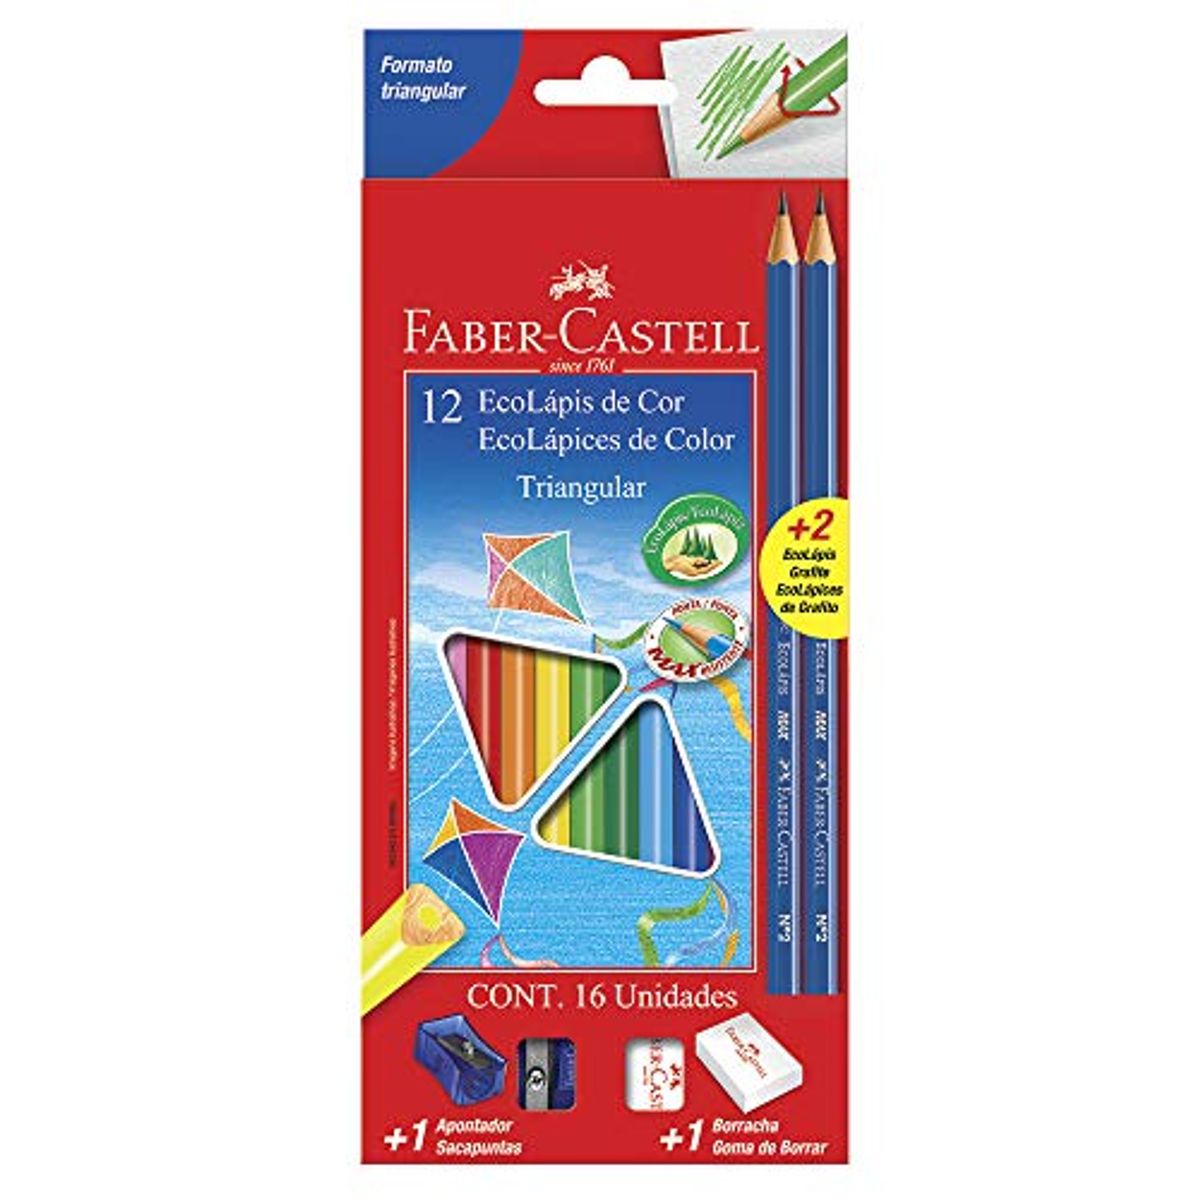 Ecolapis Faber Castell 12 Cores image number 0